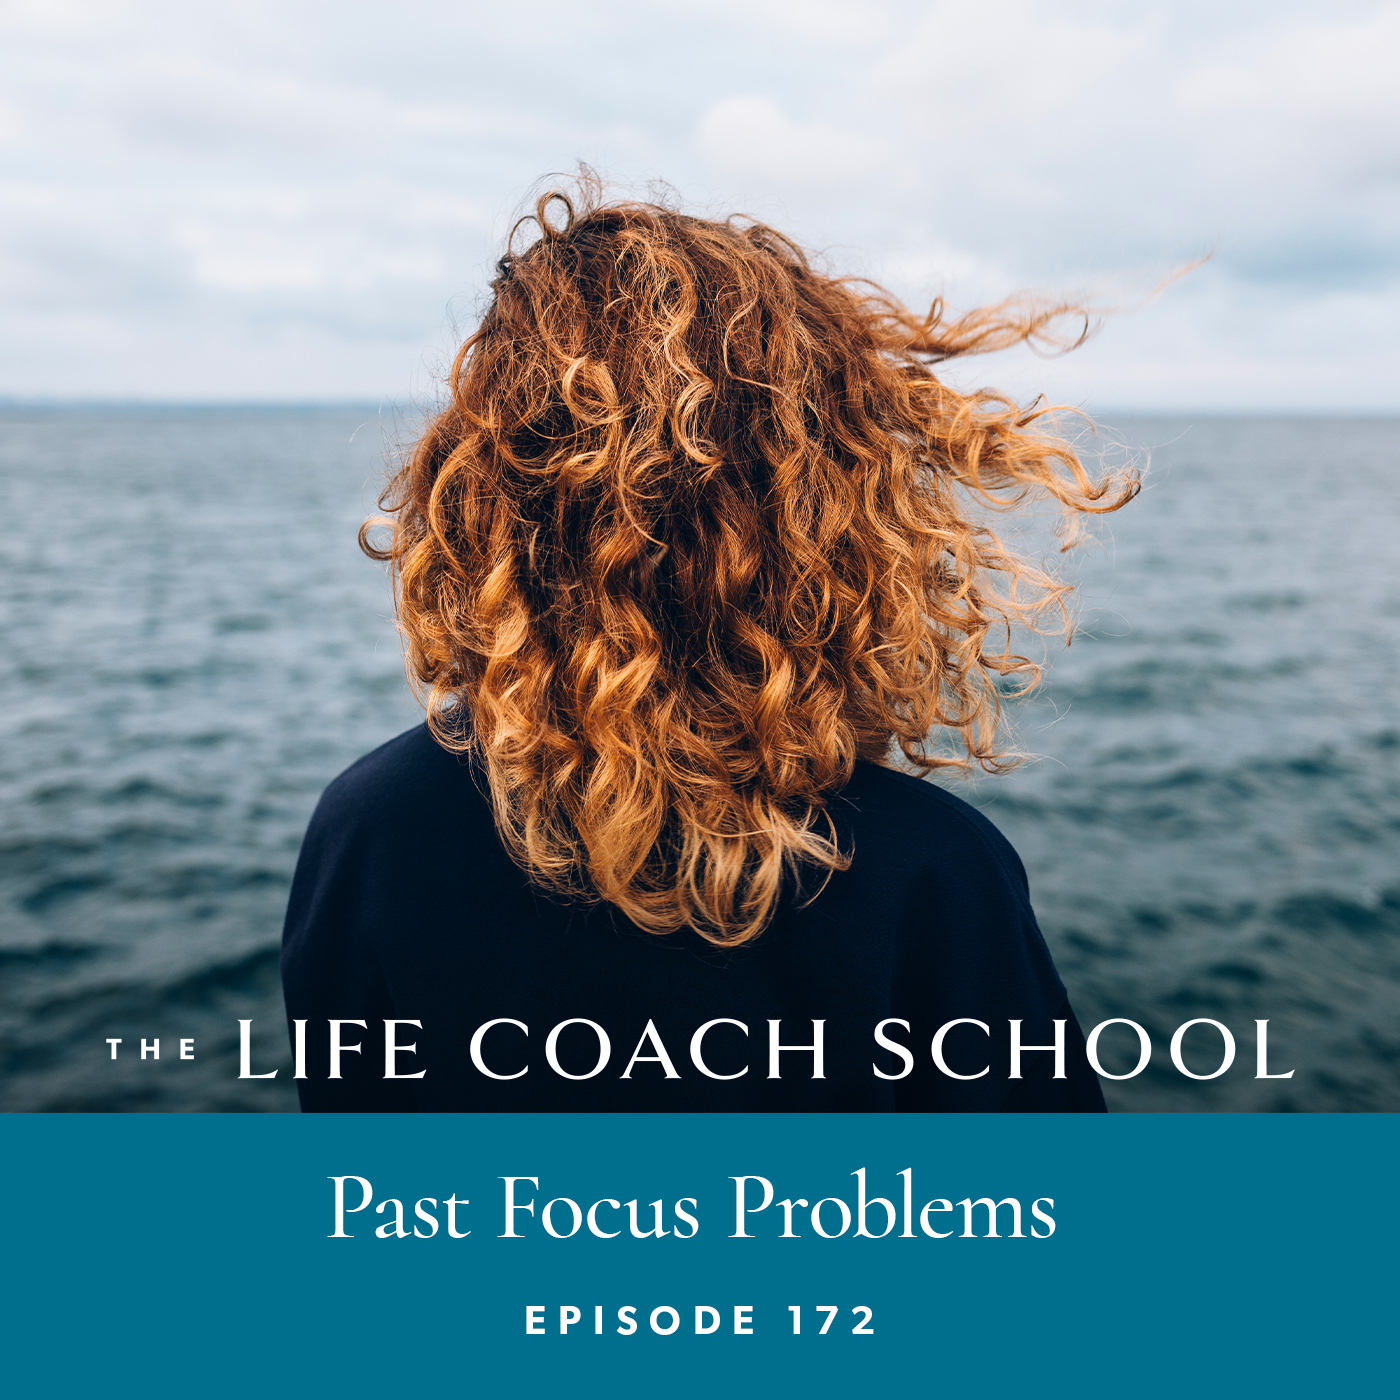 The Life Coach School Podcast with Brooke Castillo | Episode 172 | Past Focus Problems: Living in the Past